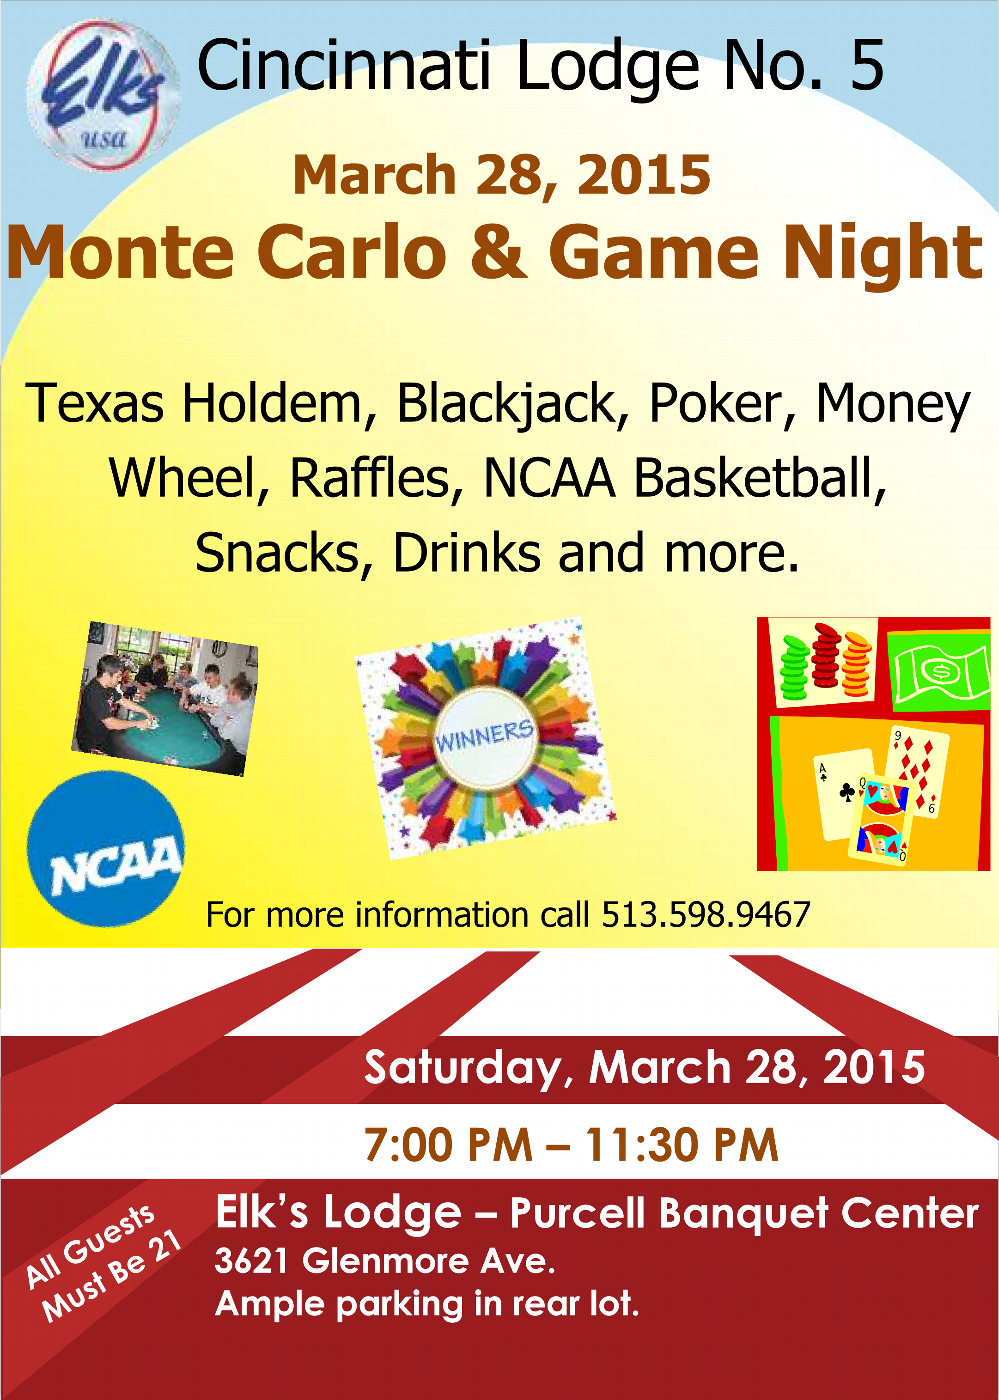 Elks Lodge 5 will hold its second Monte Carlo Game Night on Saturday March 28, 2015. Please invite all of your friends and family to join us beginning at 7:00 pm. All guests must be 21 and up to enter. If you have any questions please call 513-598-9467. Hope to see you there!